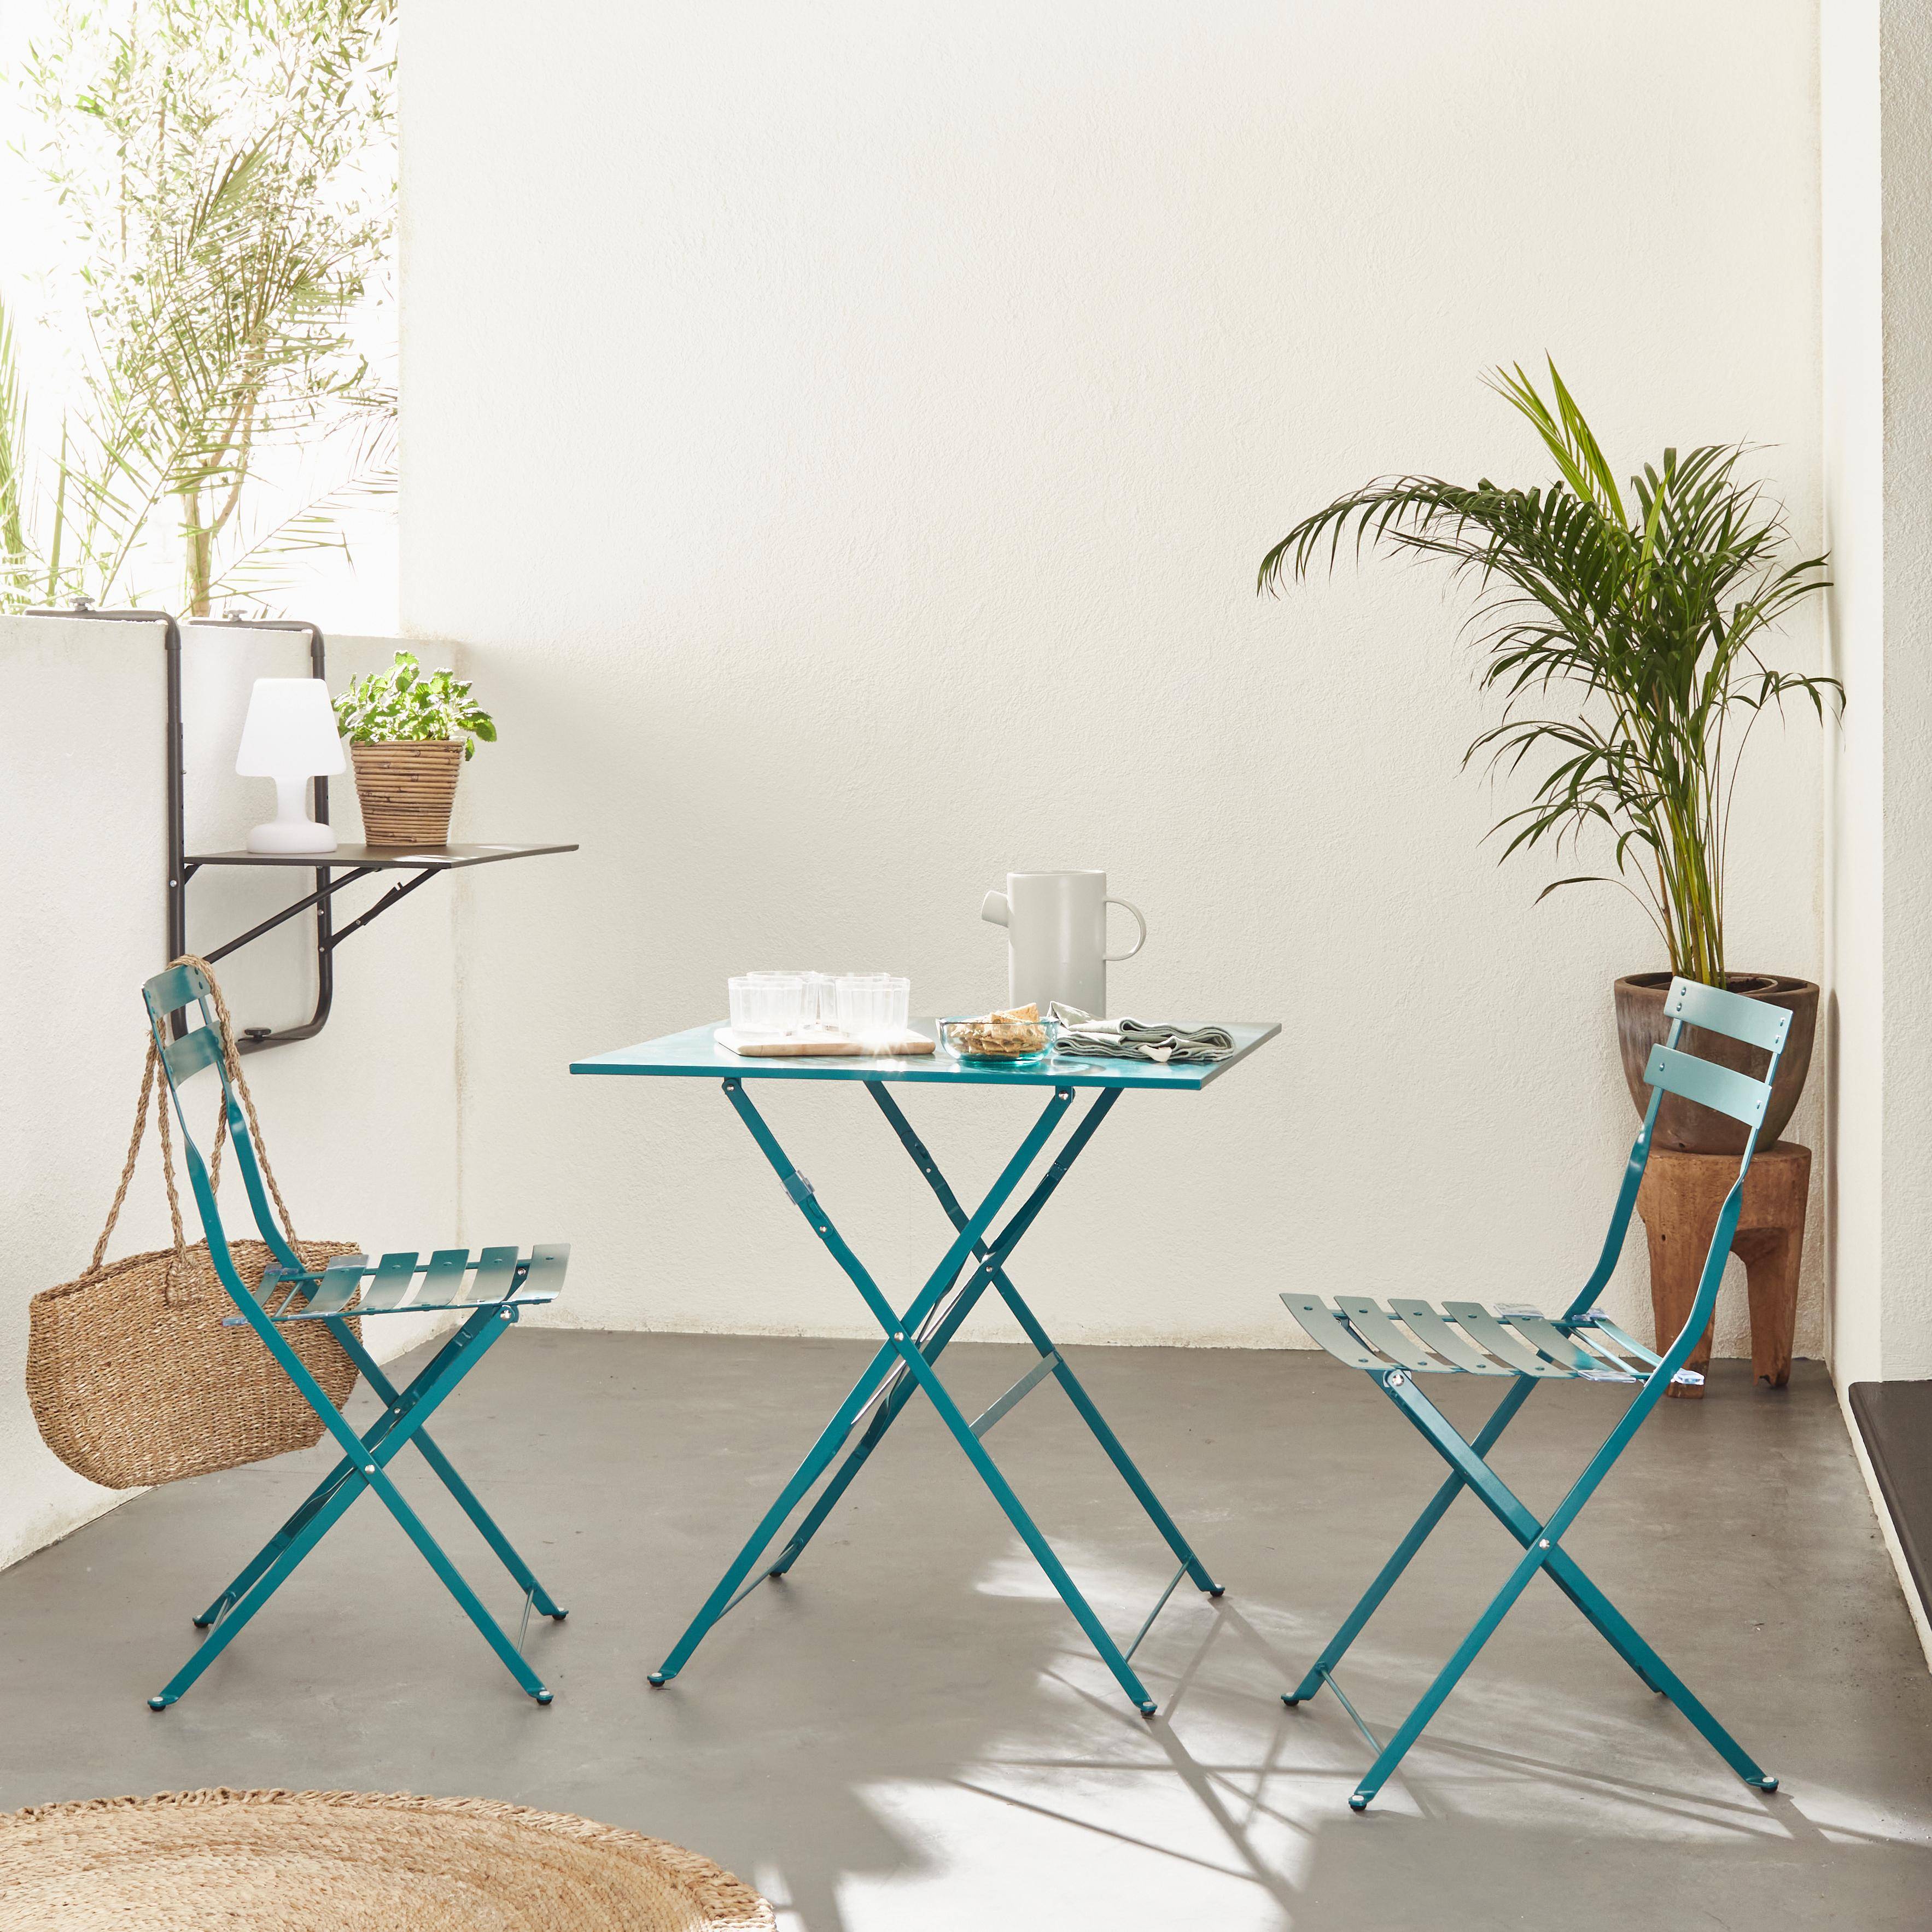 2-seater foldable thermo-lacquered steel bistro garden table with chairs, 70x70cm - Emilia - Duck Blue Photo1